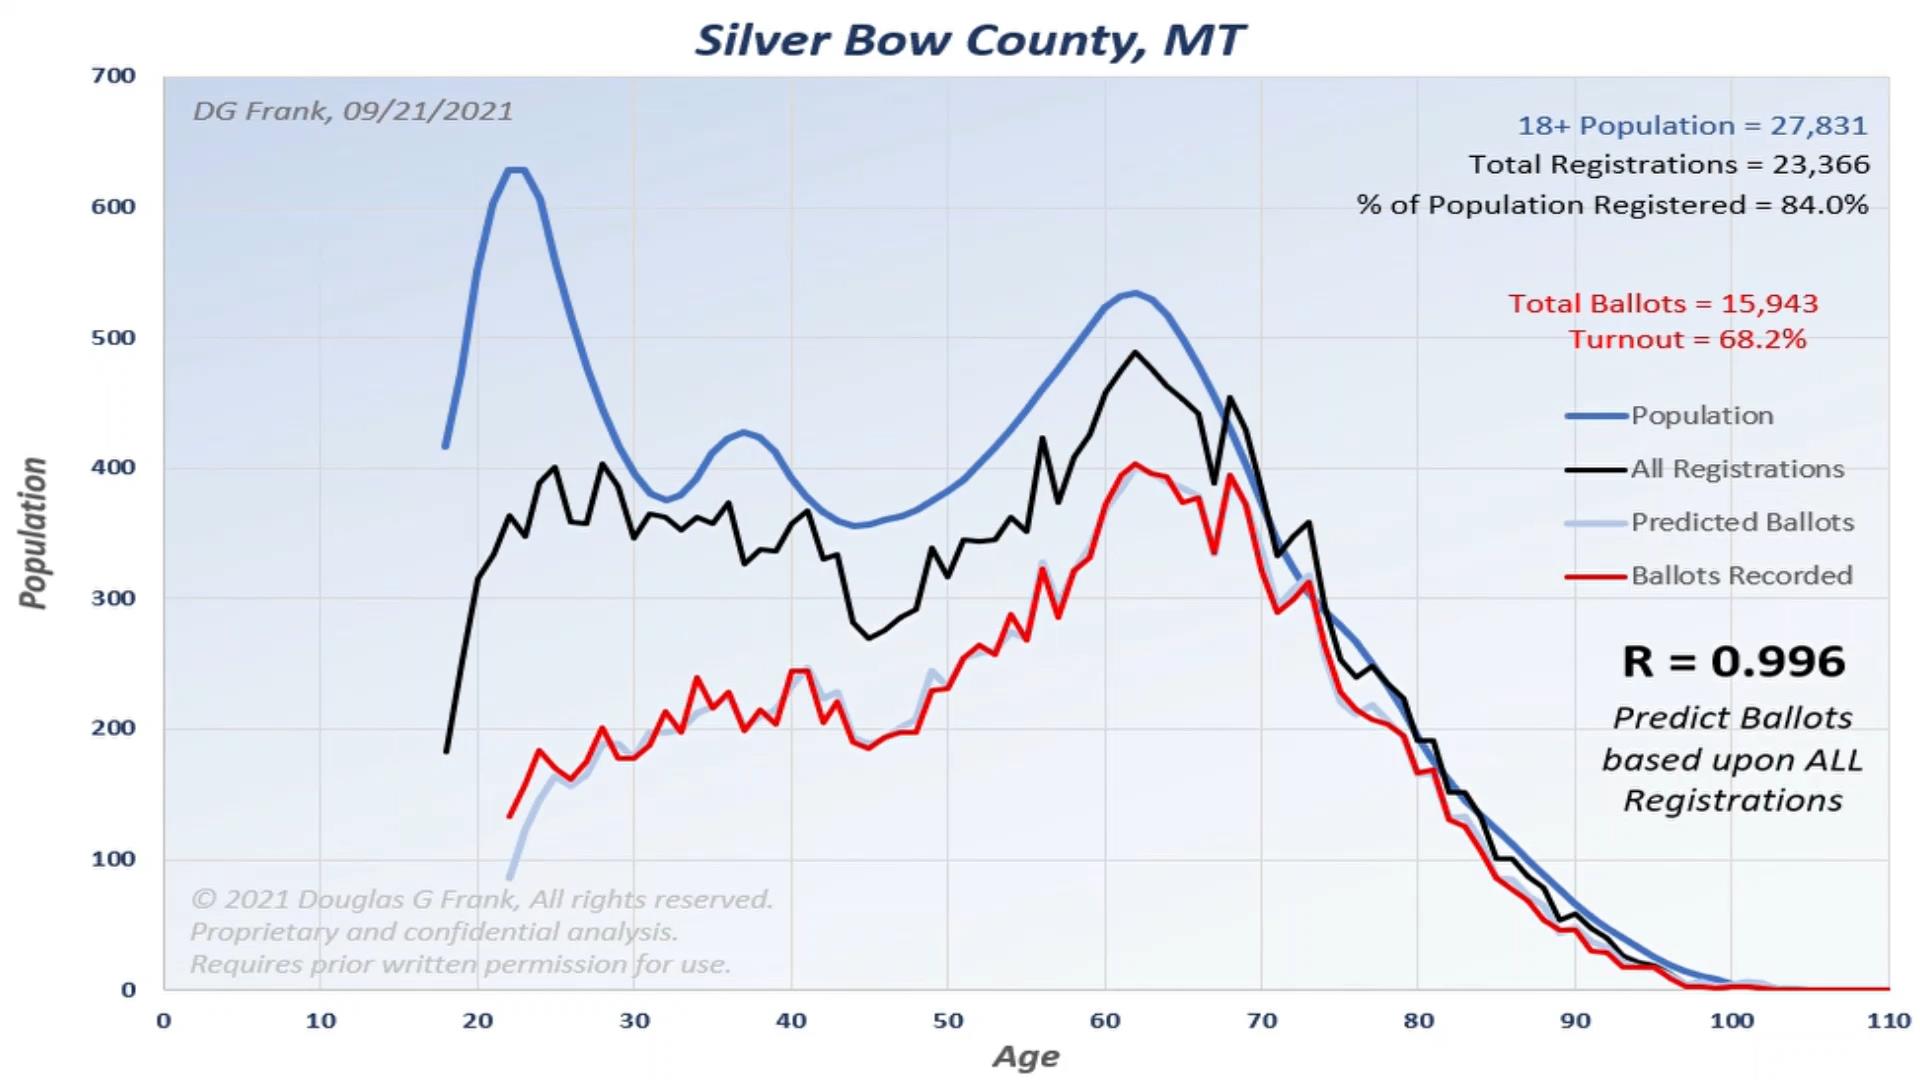 Silver Bow County 2020 Election Analysis Chart by Dr. Doug Frank